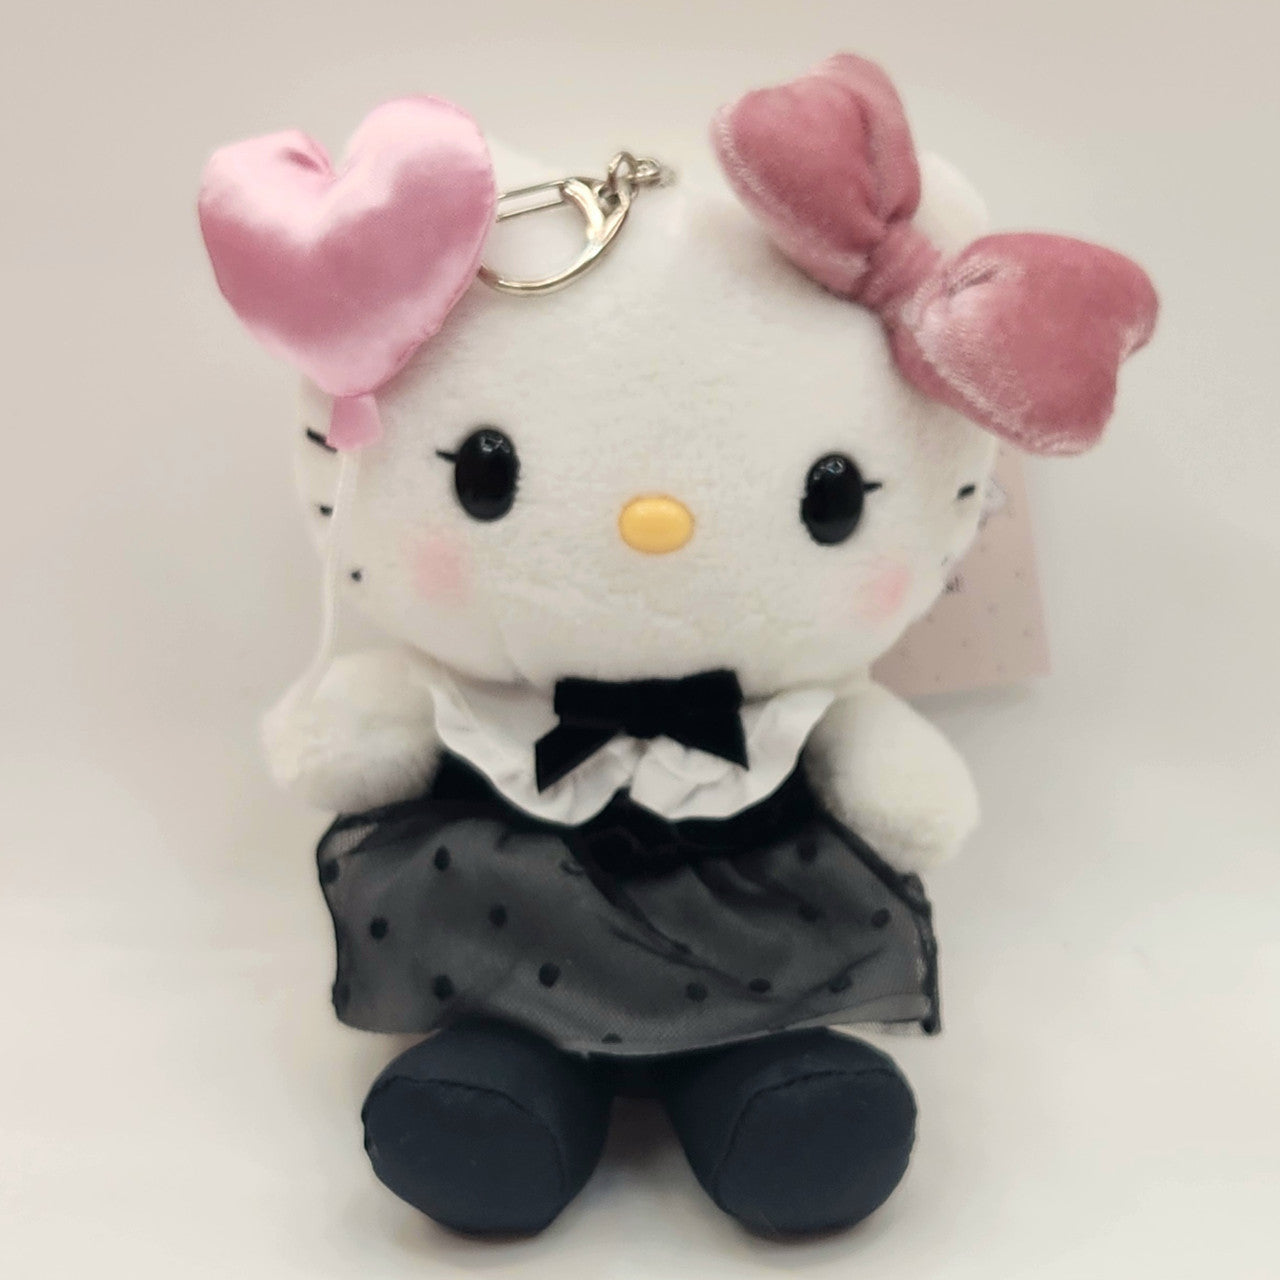 Sanrio SWEET PARTY Keychain with Mascot